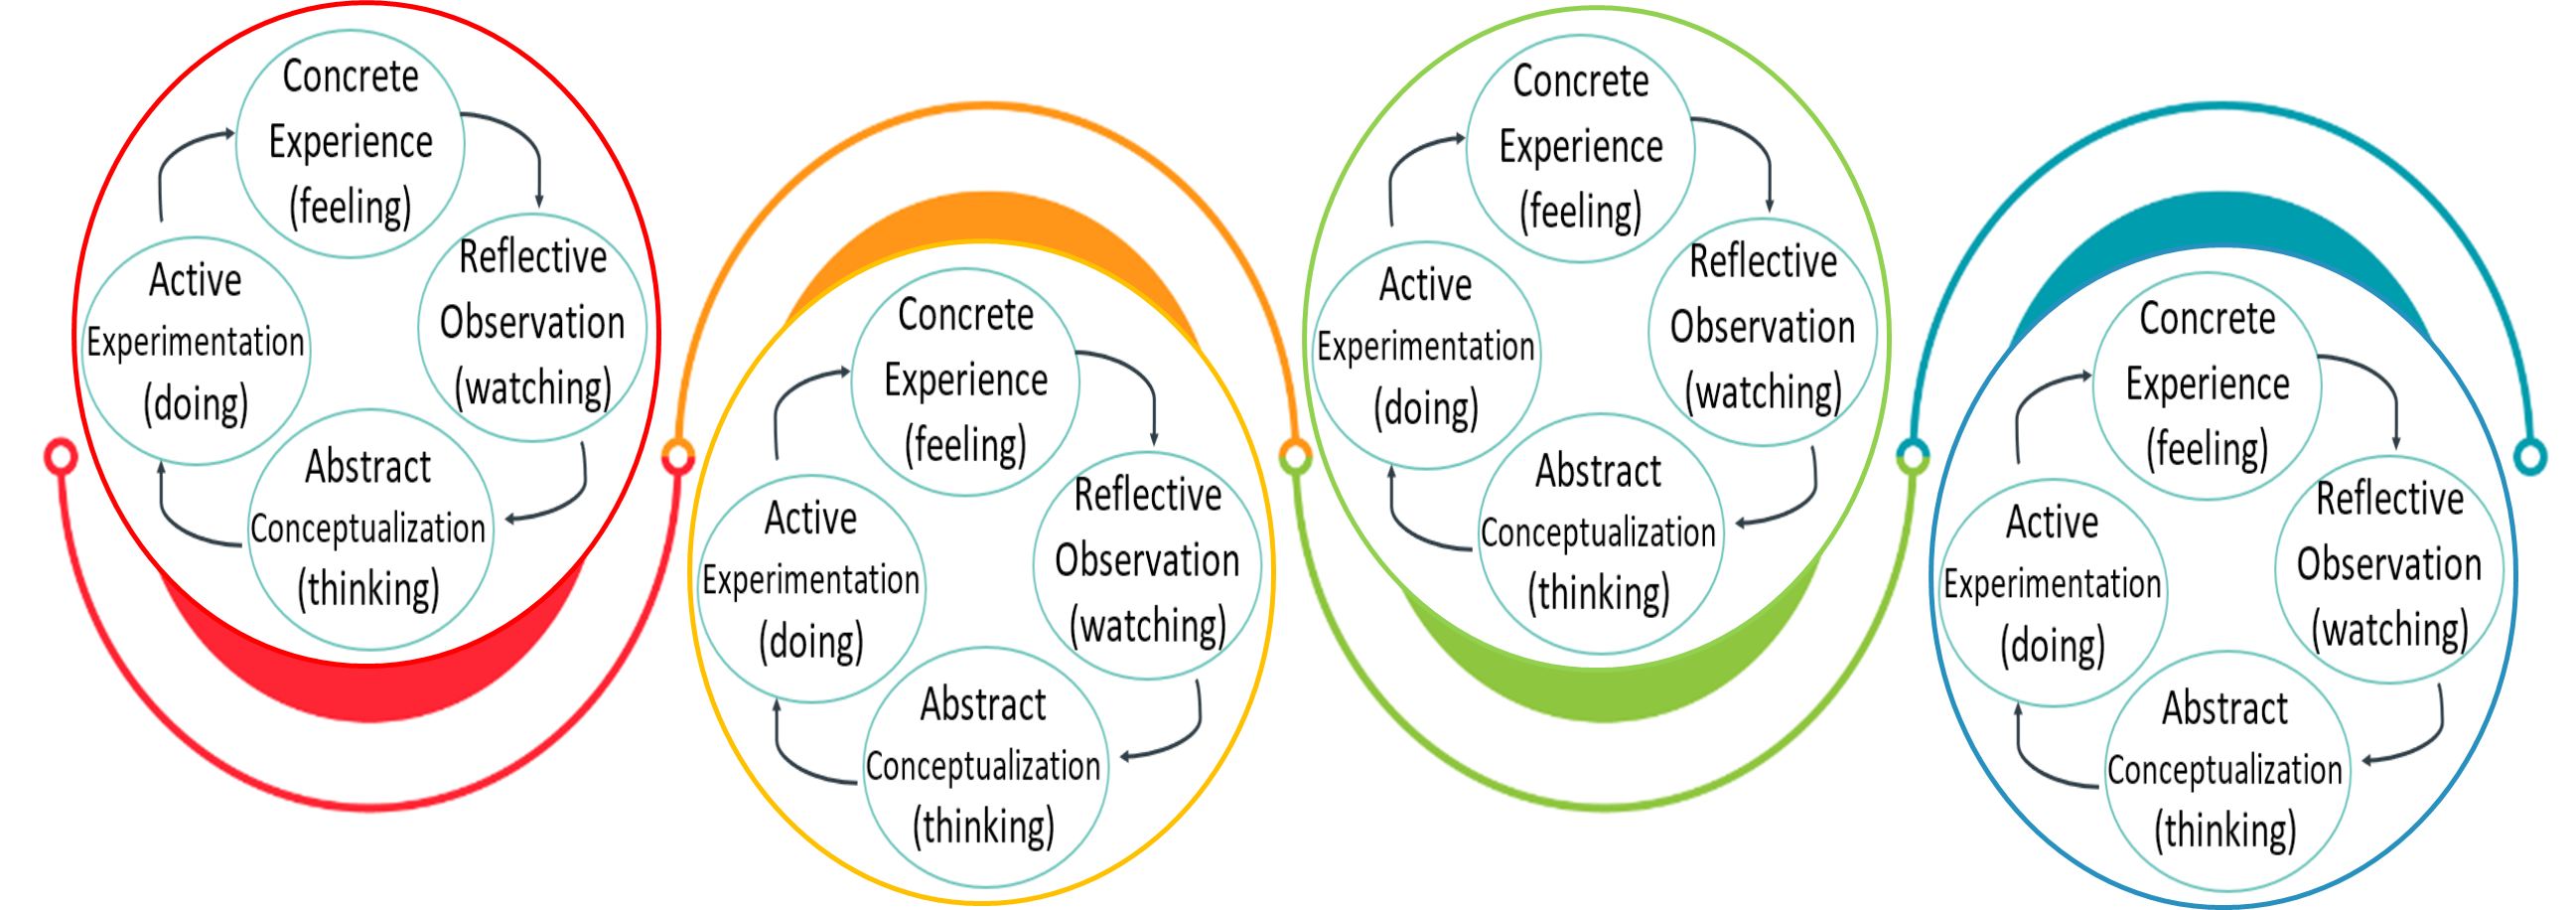 The reflection cycle starts from concrete experience - feeling, reflective observation - watching, abstract conceptualization - thinking, and active experimentation - doing